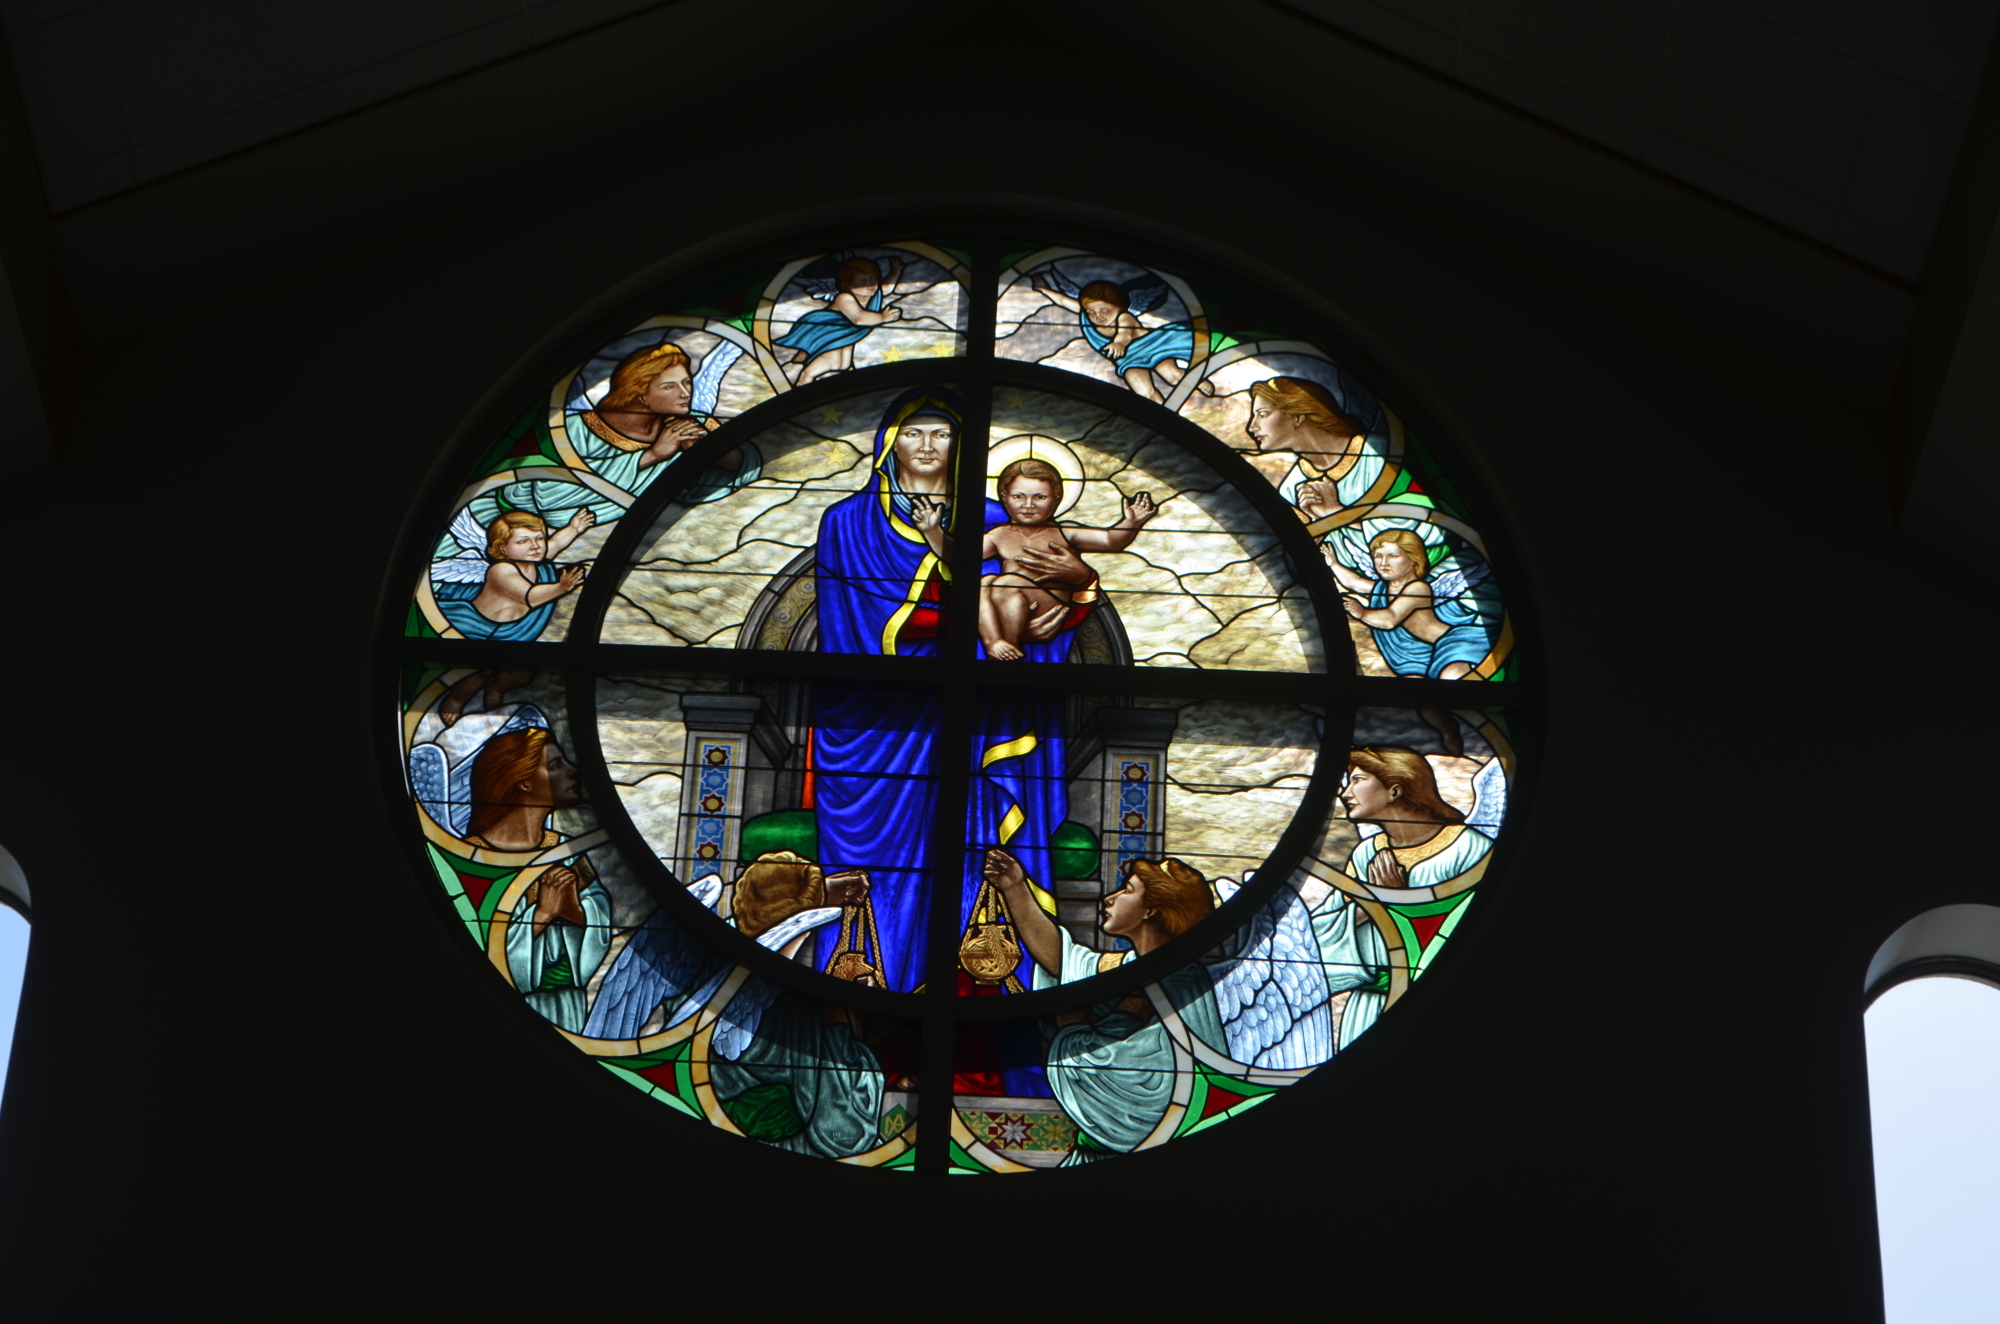 The rose window is the only stained glass window currently in the church, but there are already plans for more.